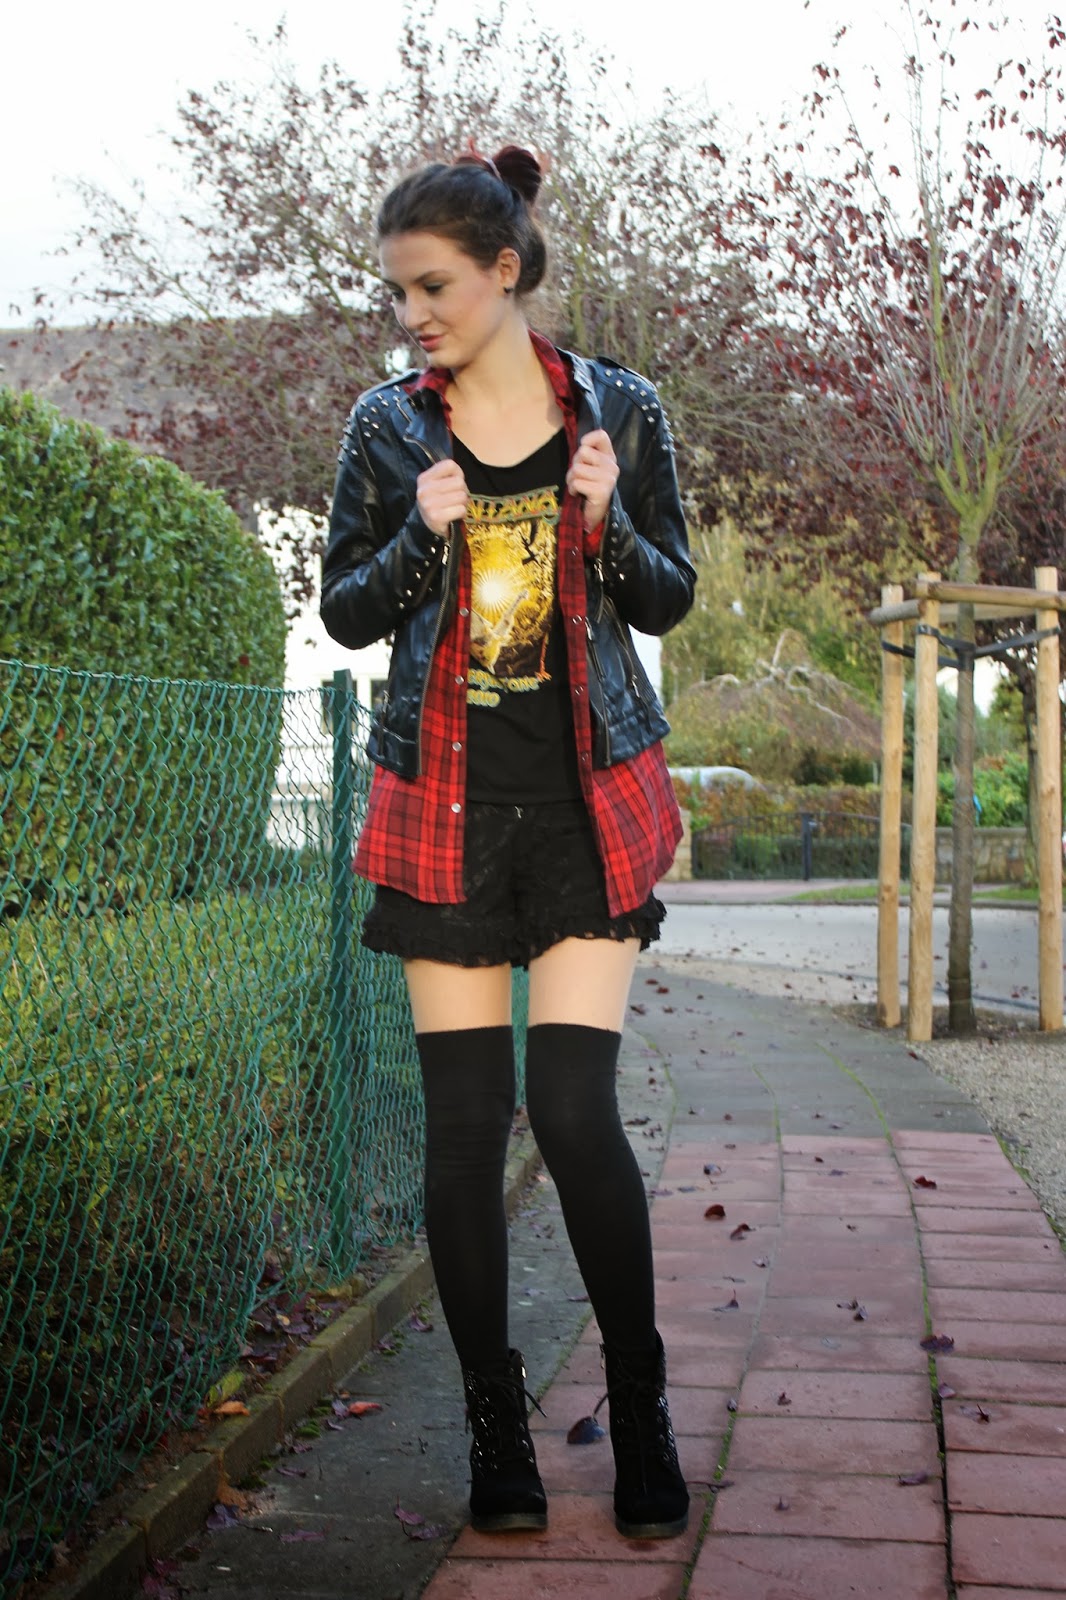 Plaid lace leather and knee high socks  ootd  Fuel to Life